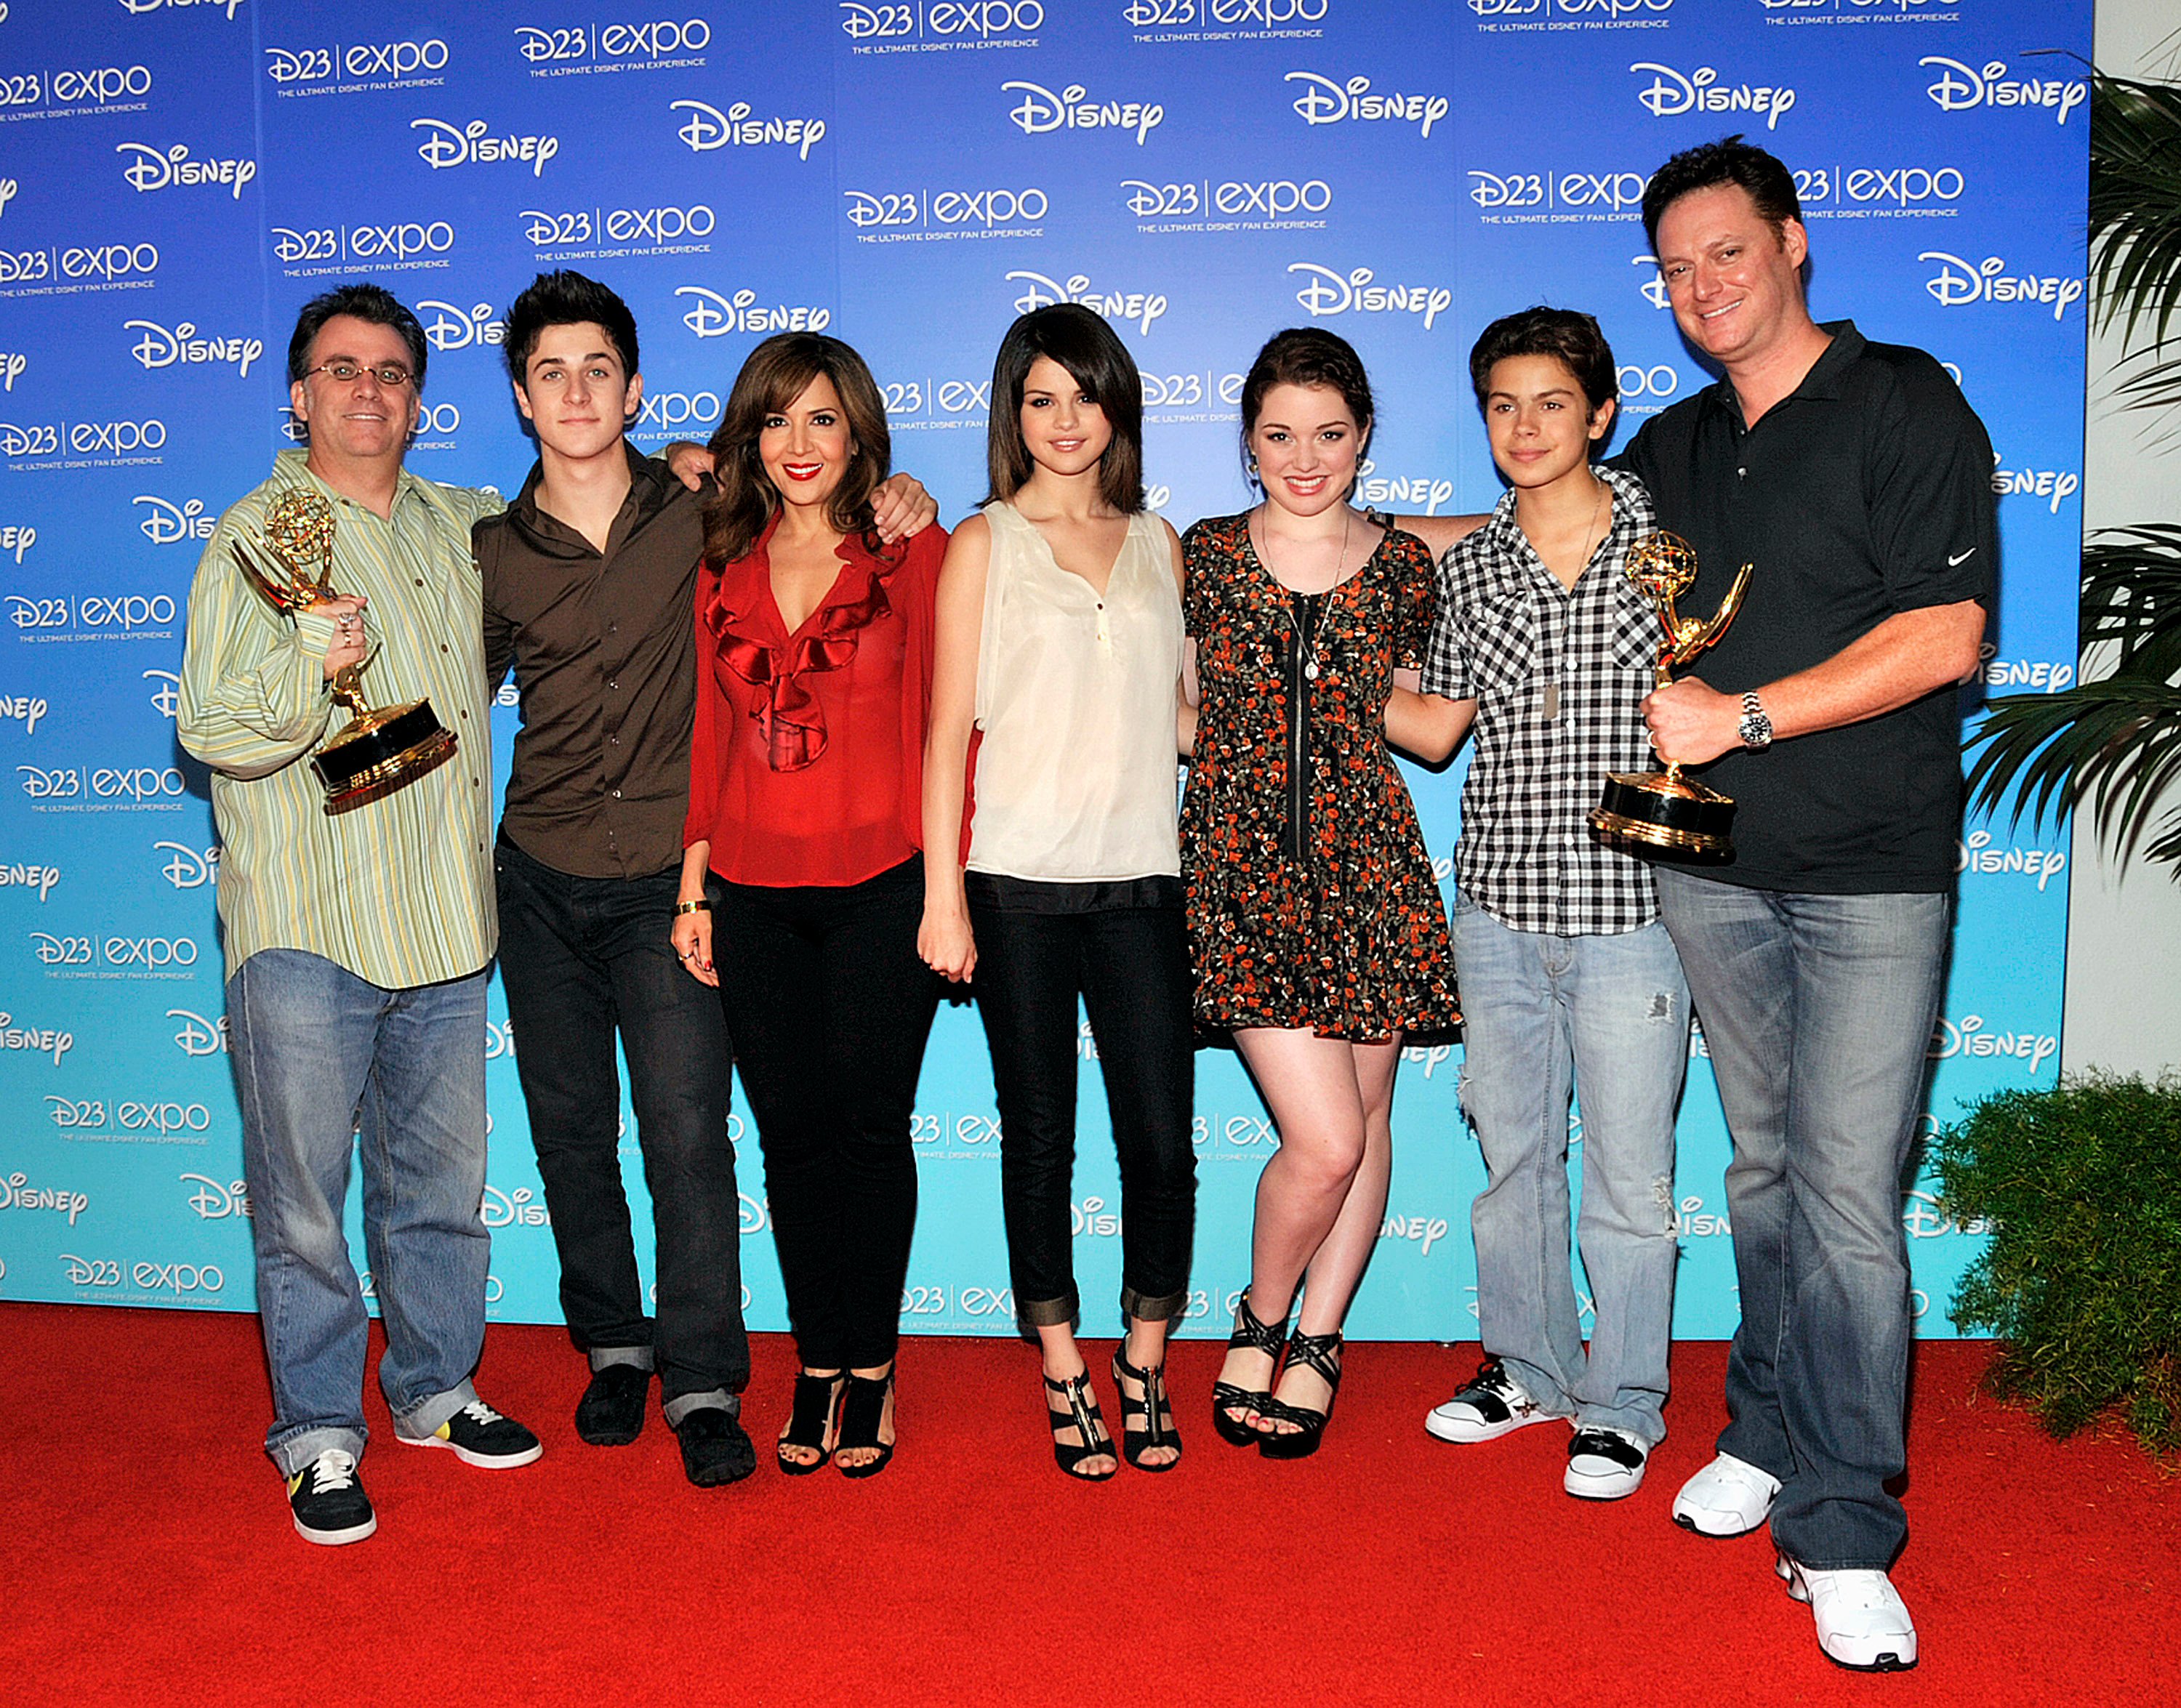 (L-R): 'Wizards of Waverly Place' executive producer Peter Murietta, actors David Henrie, Maria Canals-Barrera, Selena Gomez, Jennifer Stone, Jake T. Austin and executive producer Todd J. Greenwald